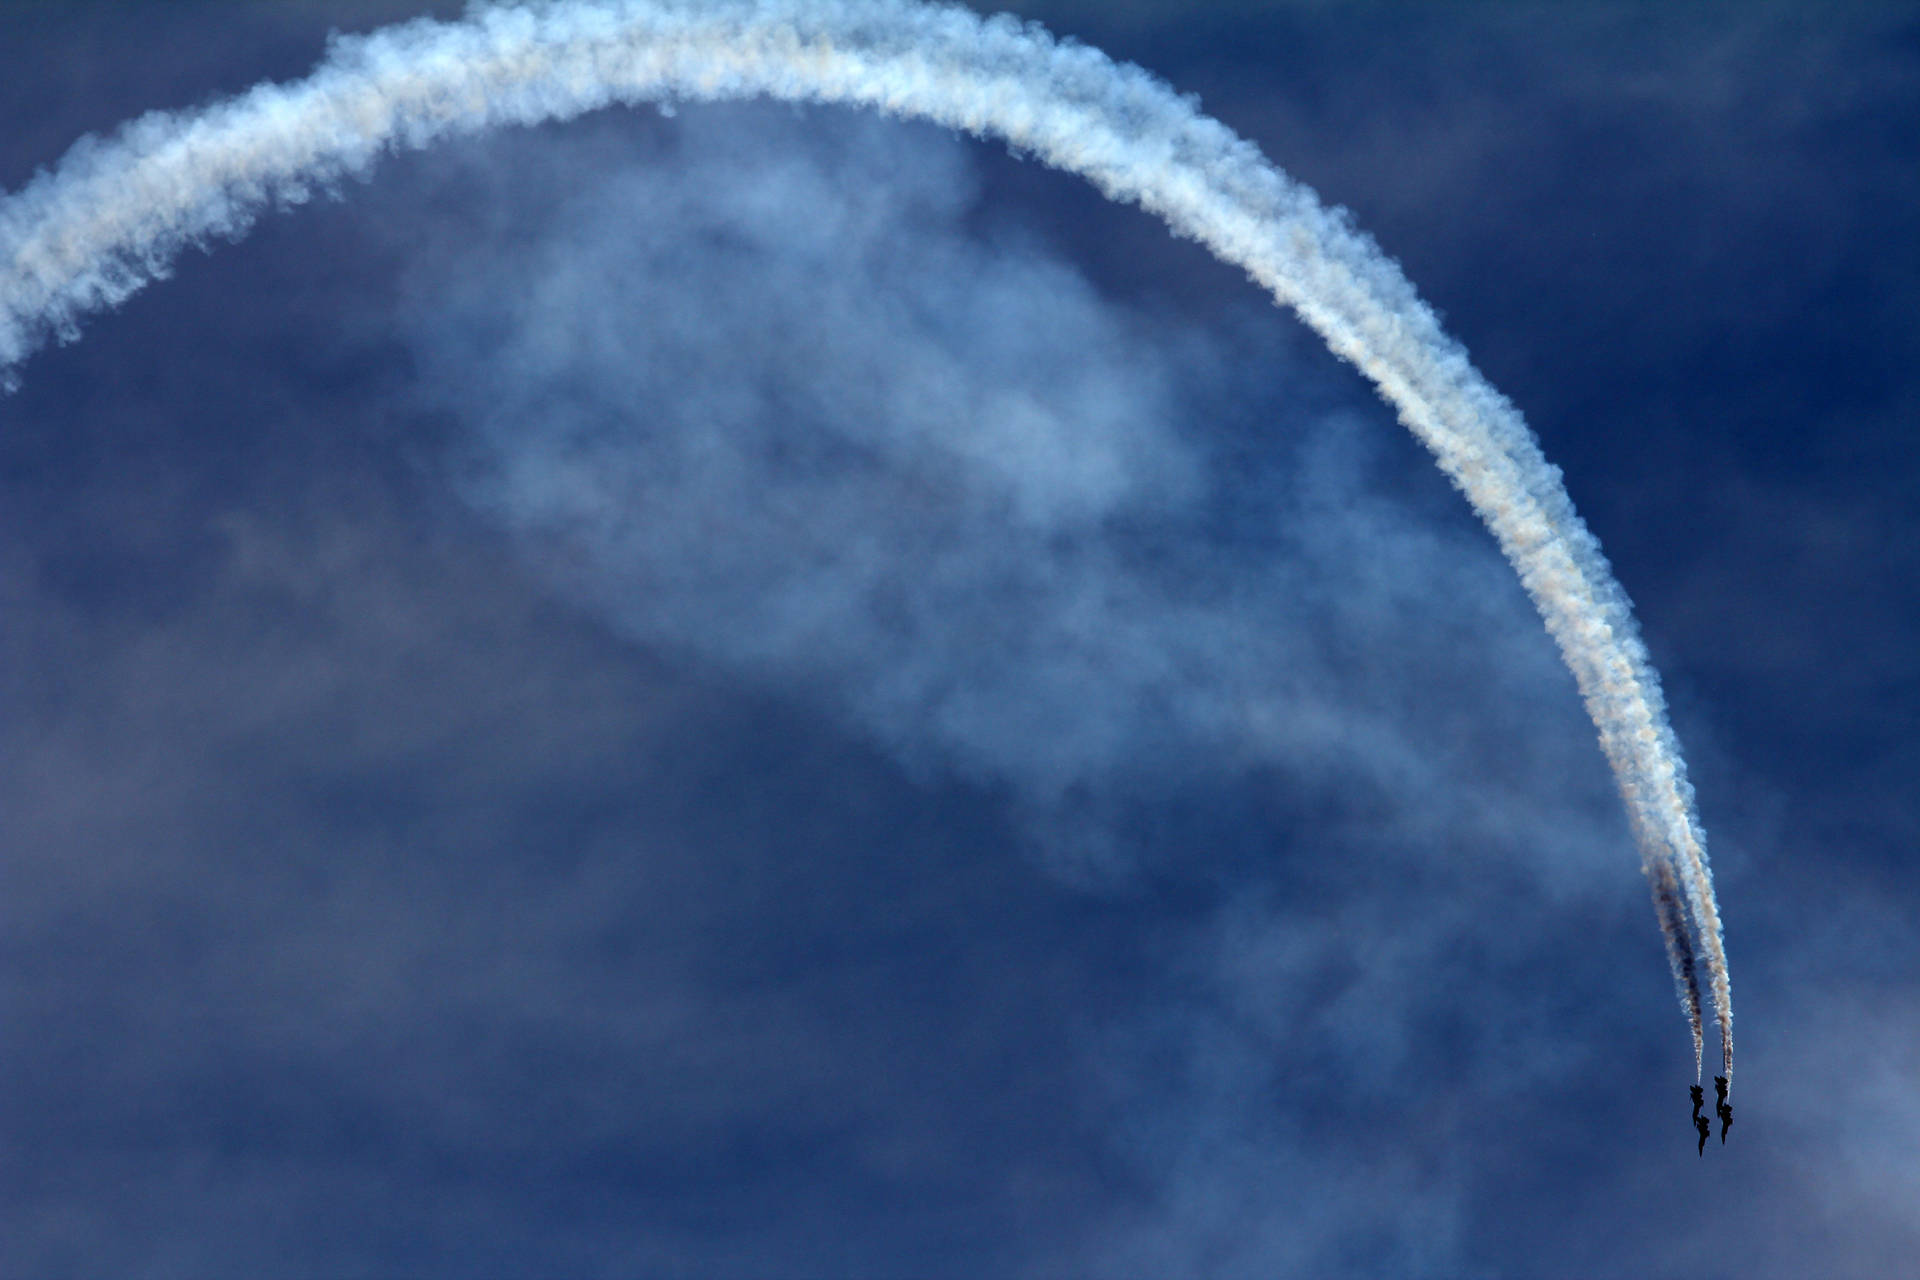 An Aerial Display Of Aerobatic Stunts By An Airplane Background